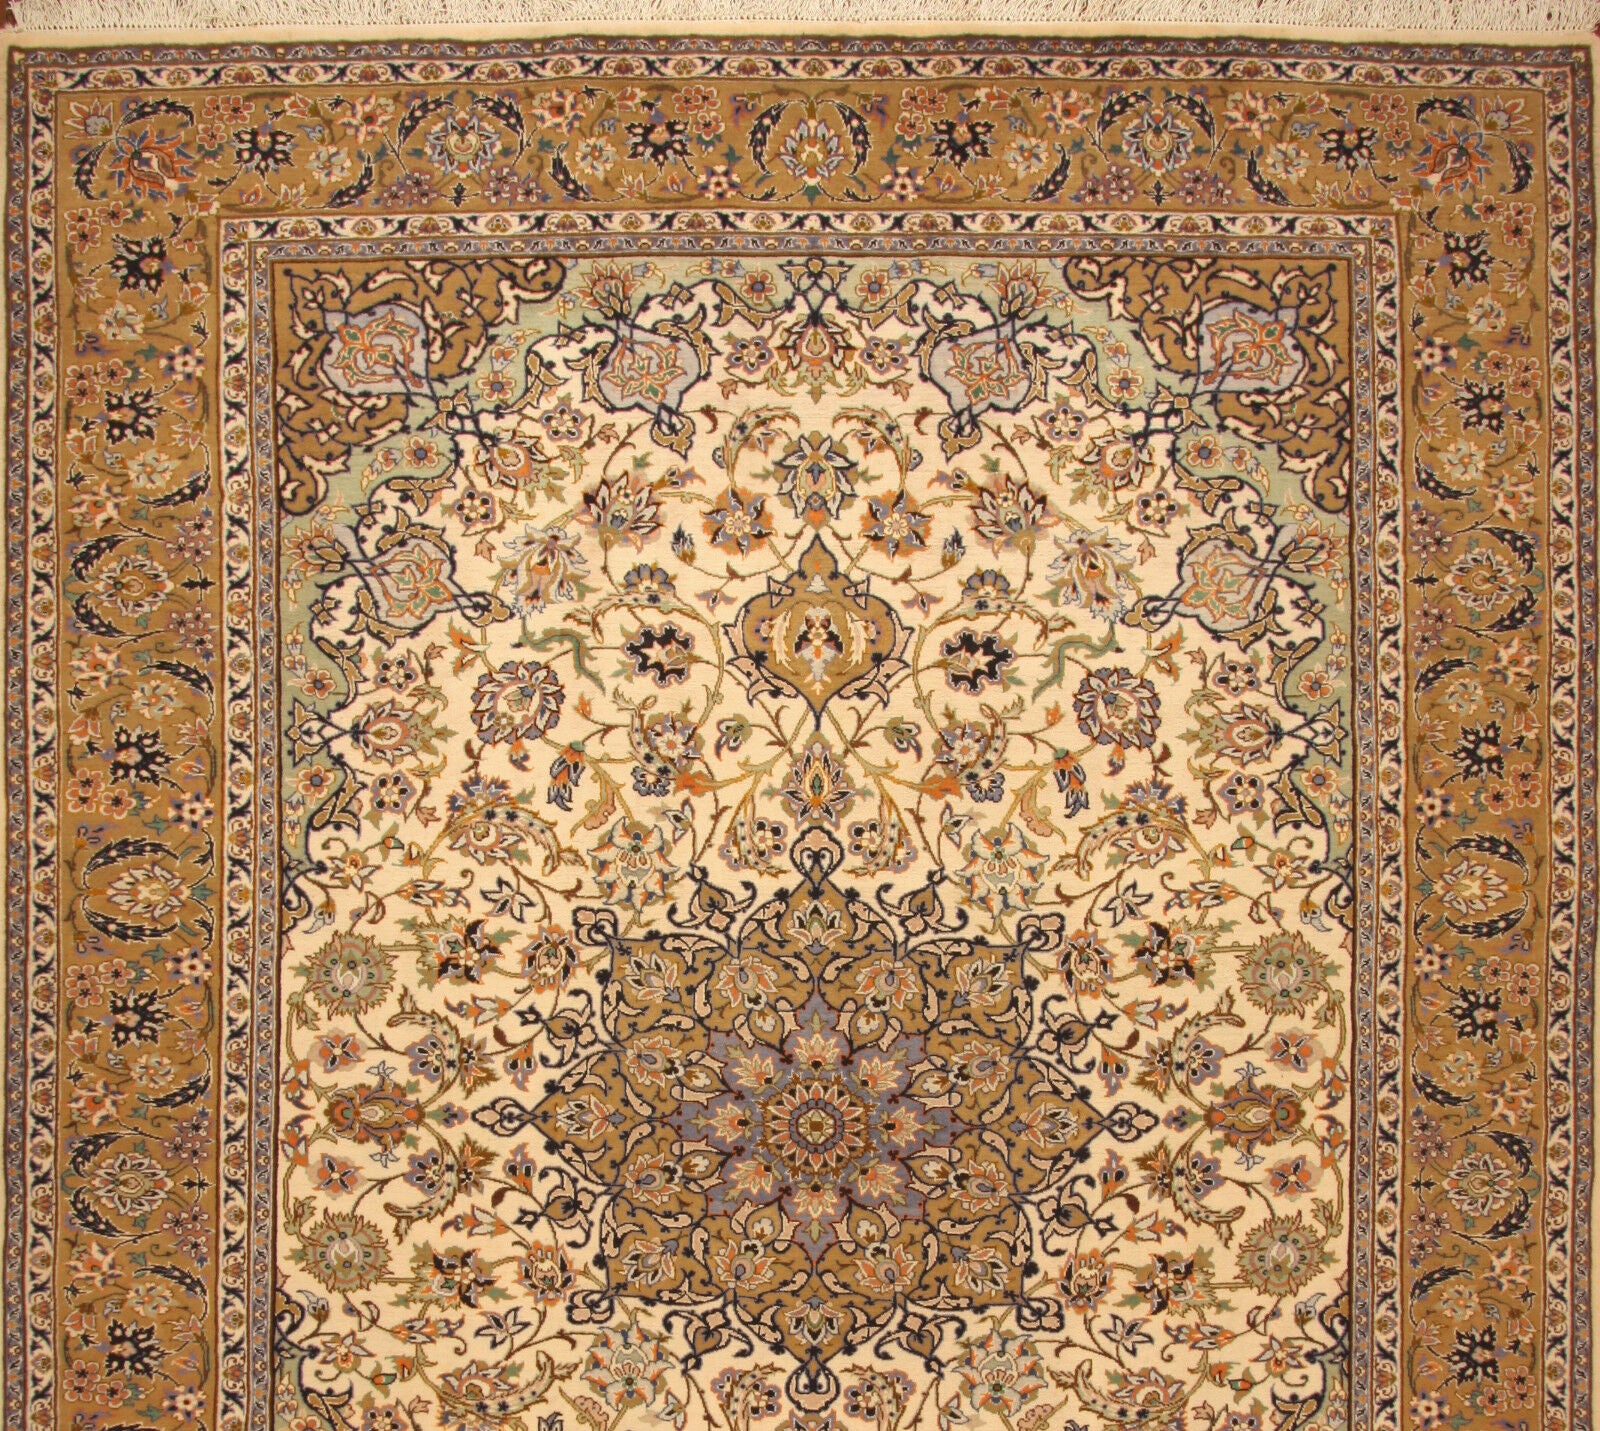 Side view of the Handmade Contemporary Persian Isfahan Rug demonstrating texture